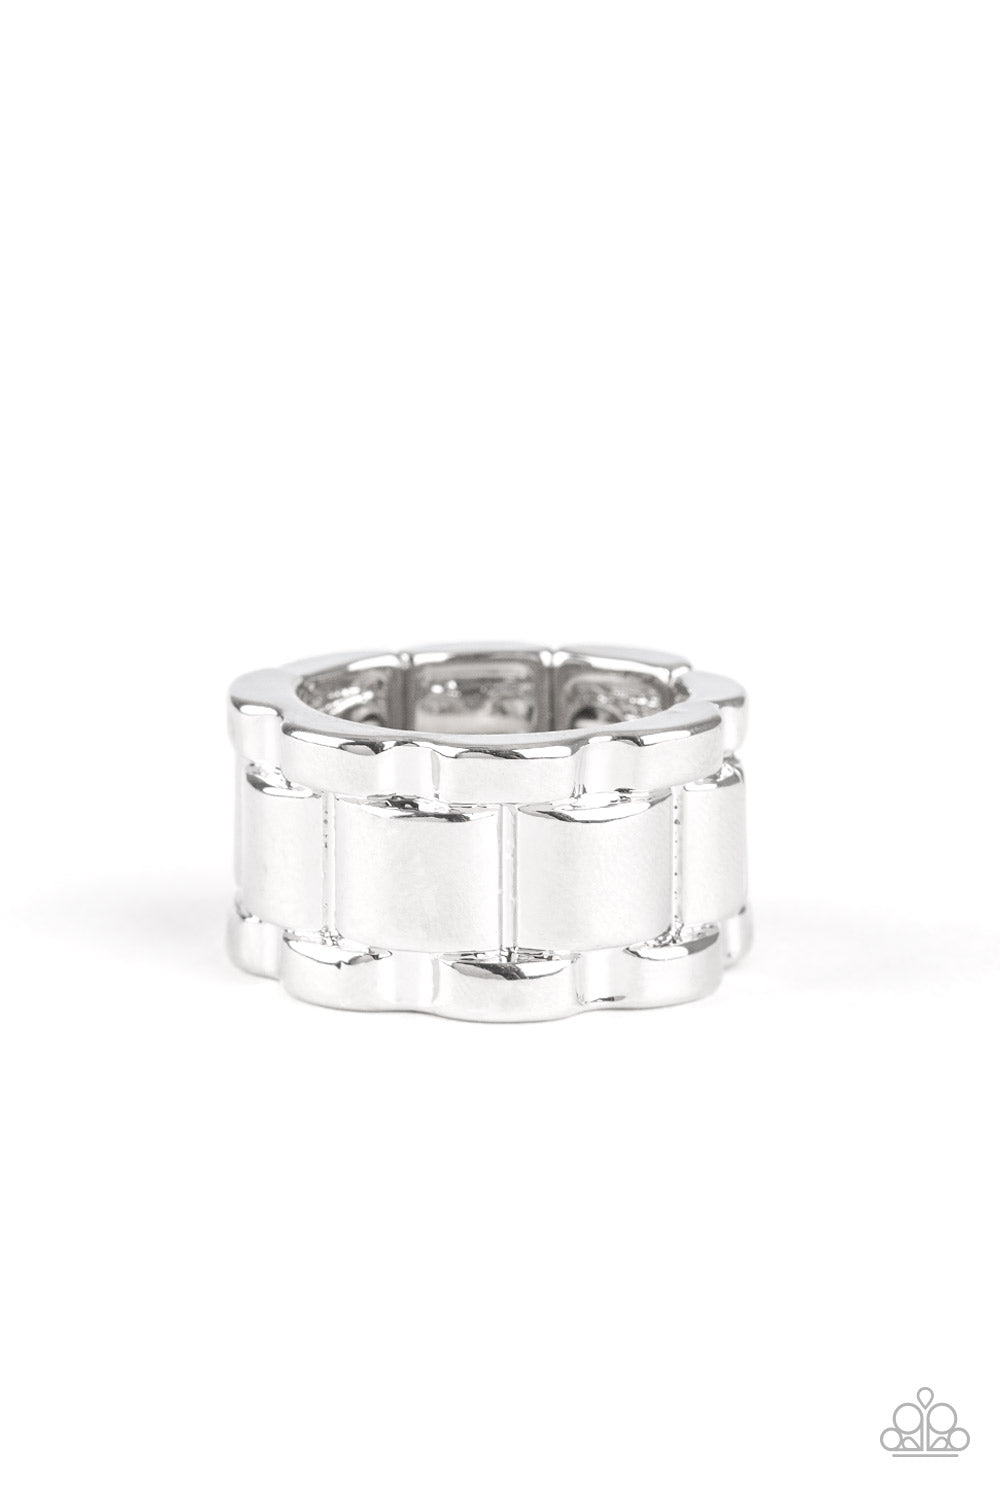 Modern Machinery - Silver Embossed in a tread-like pattern, an ornate silver band arcs across the finger for a bold look. Features a stretchy band for a flexible fit.   Sold as one individual ring.